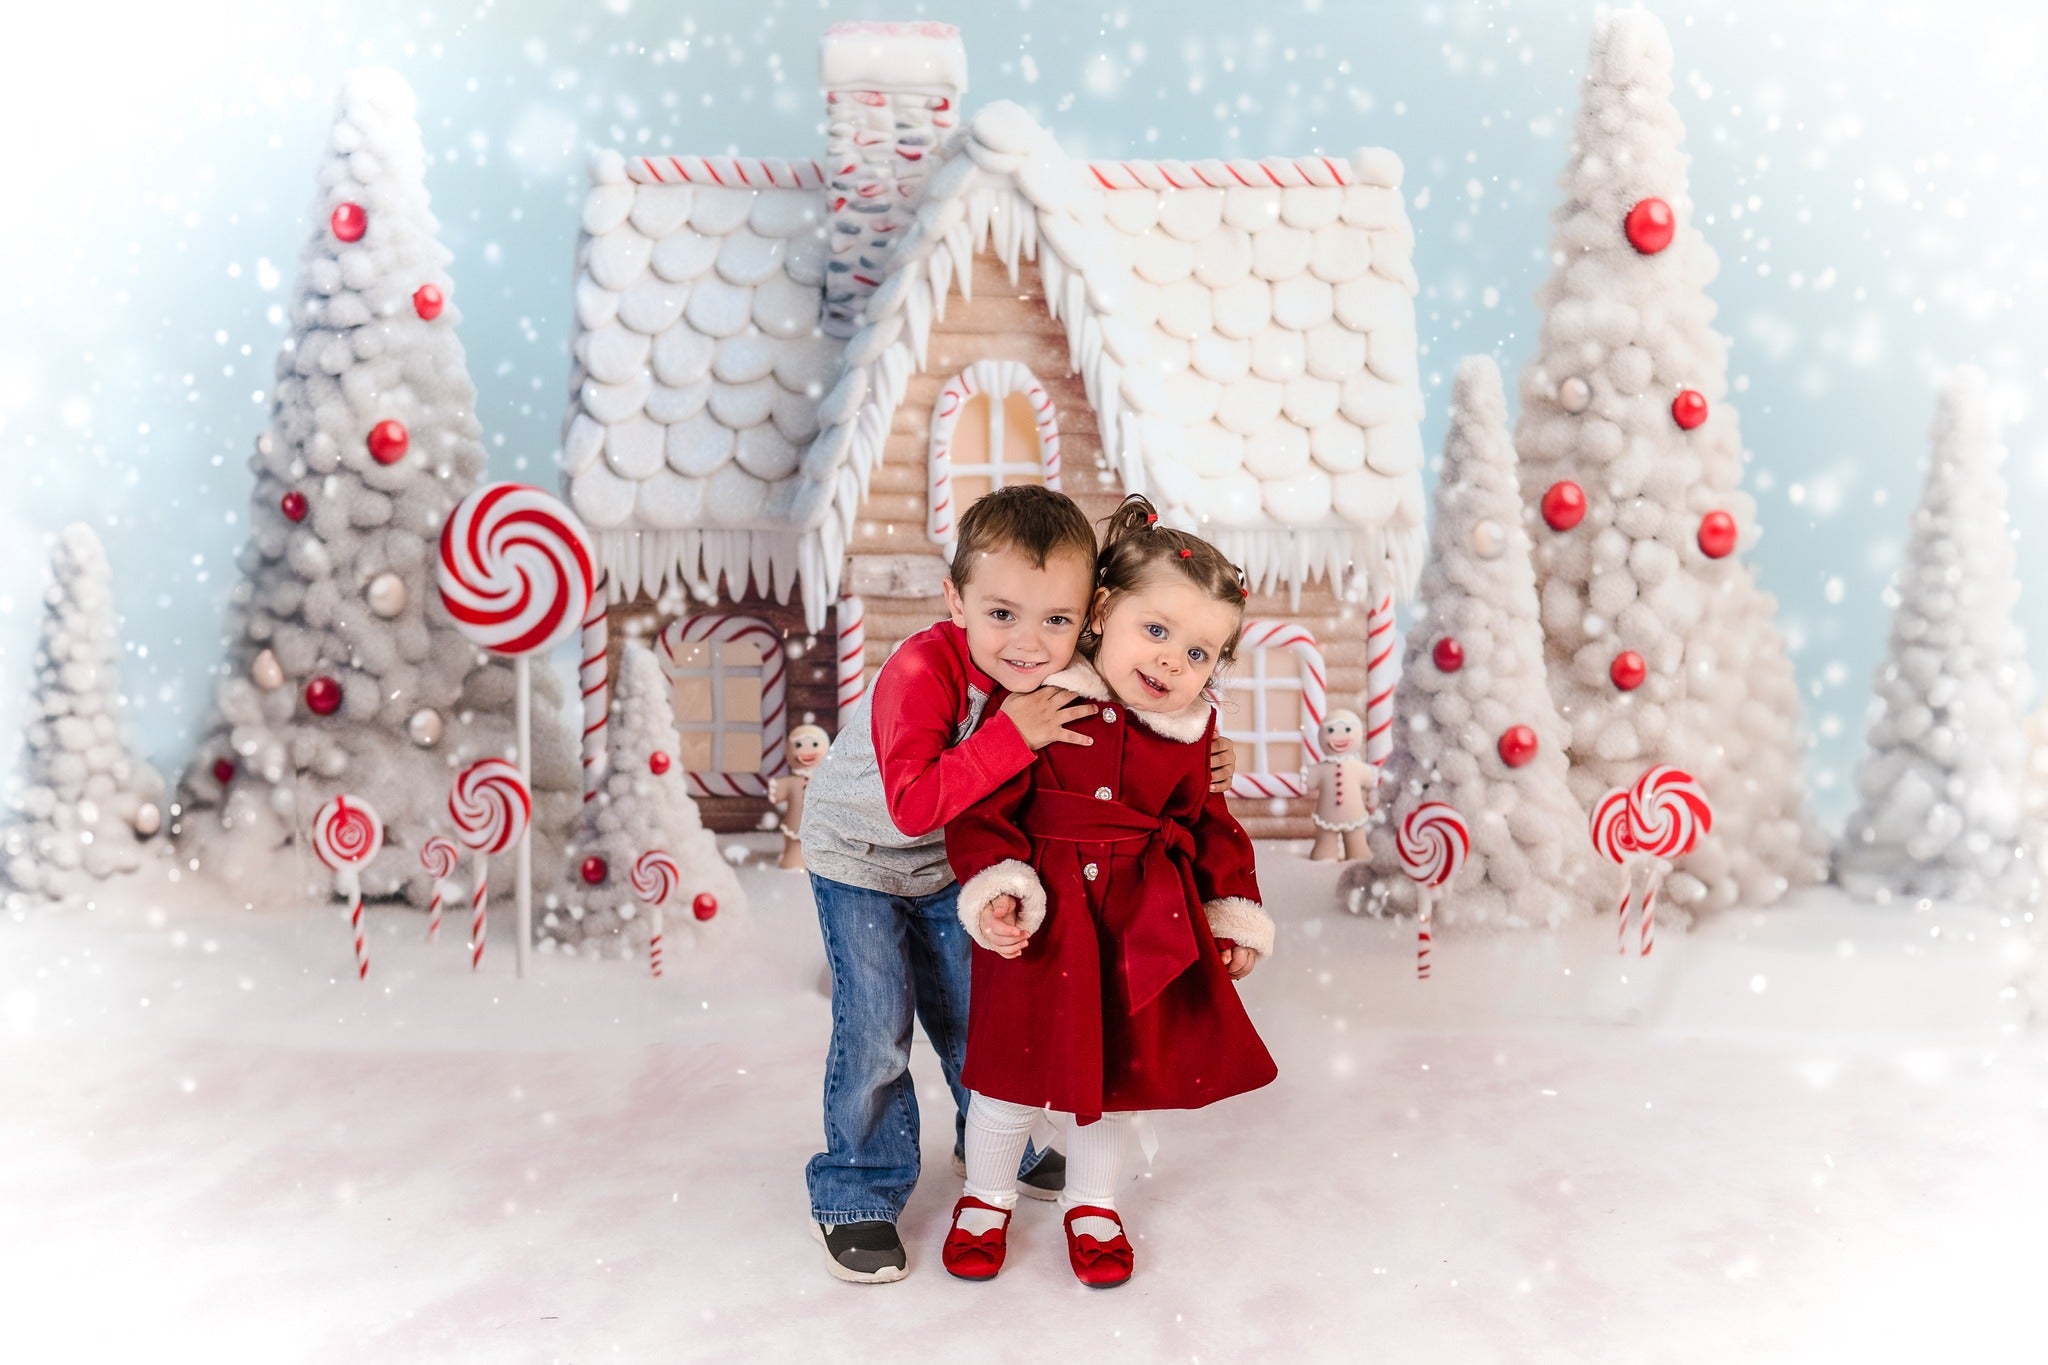 Kate Christmas Candy Snow House Backdrop+White Snow Floor Backdrop